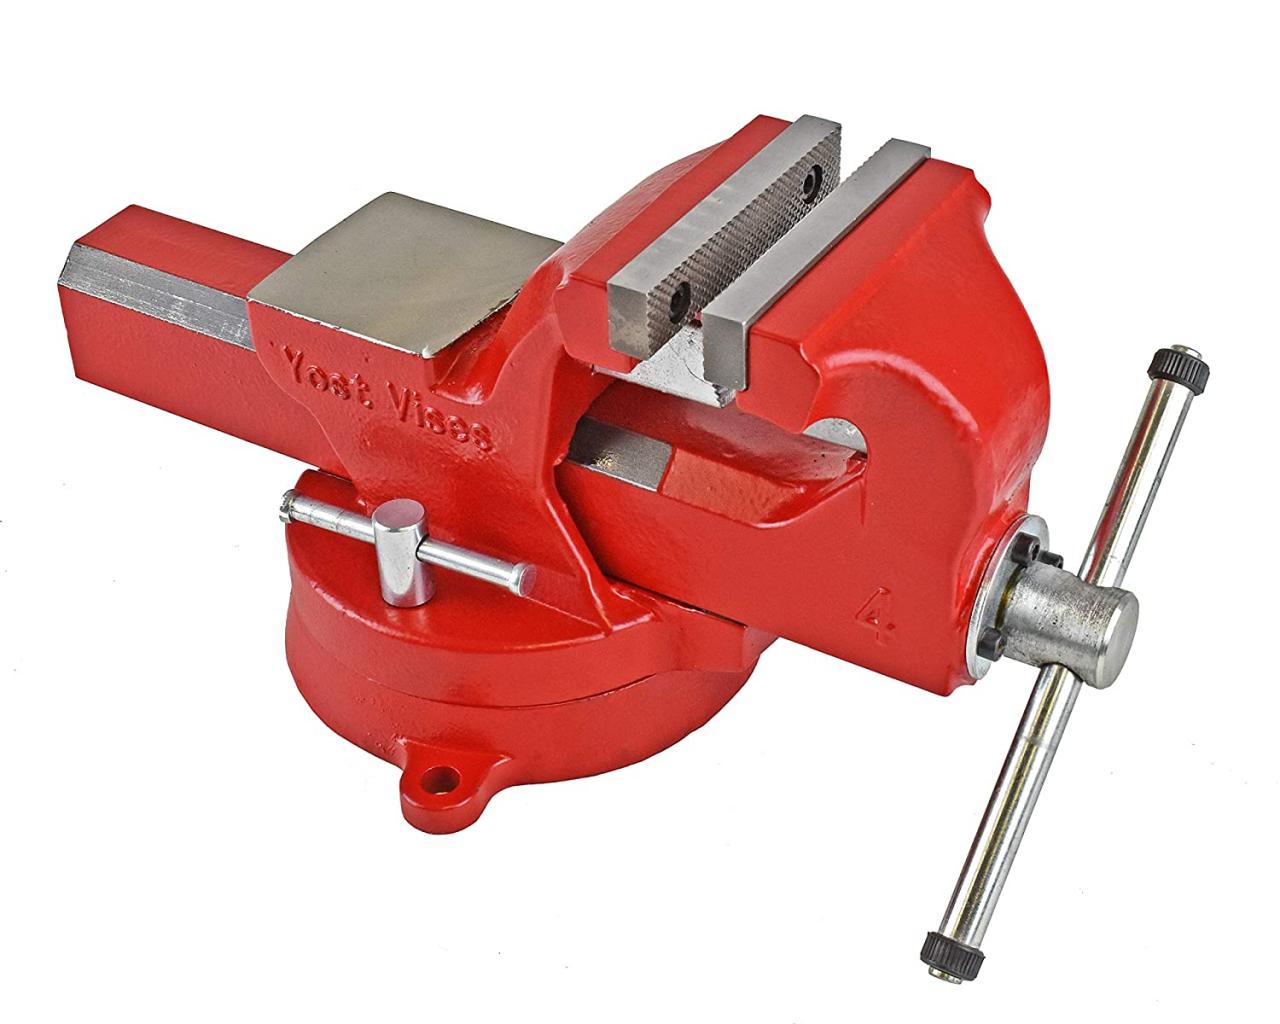 Yost Vises FSV-6 6-Inch Heavy-Duty Forged Steel Bench Vise with 360-Degree  Swivel Base : Amazon.ca: Tools & Home Improvement